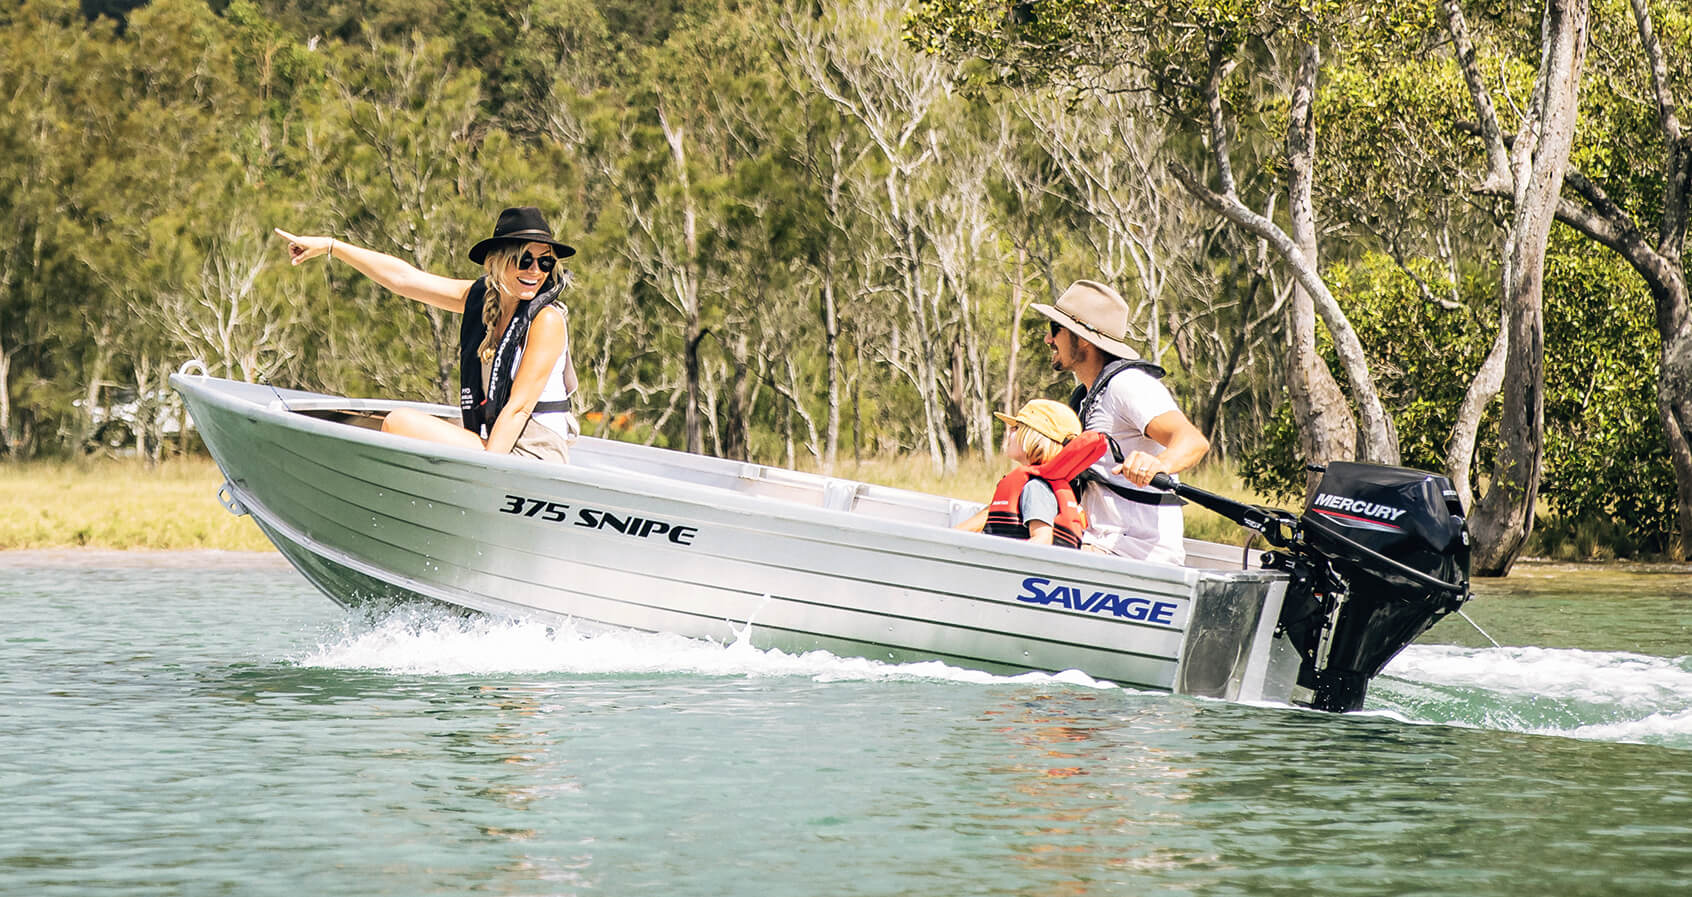 Mercury Marine has launched a savings special just in time for summer on arange of portable outboard engines